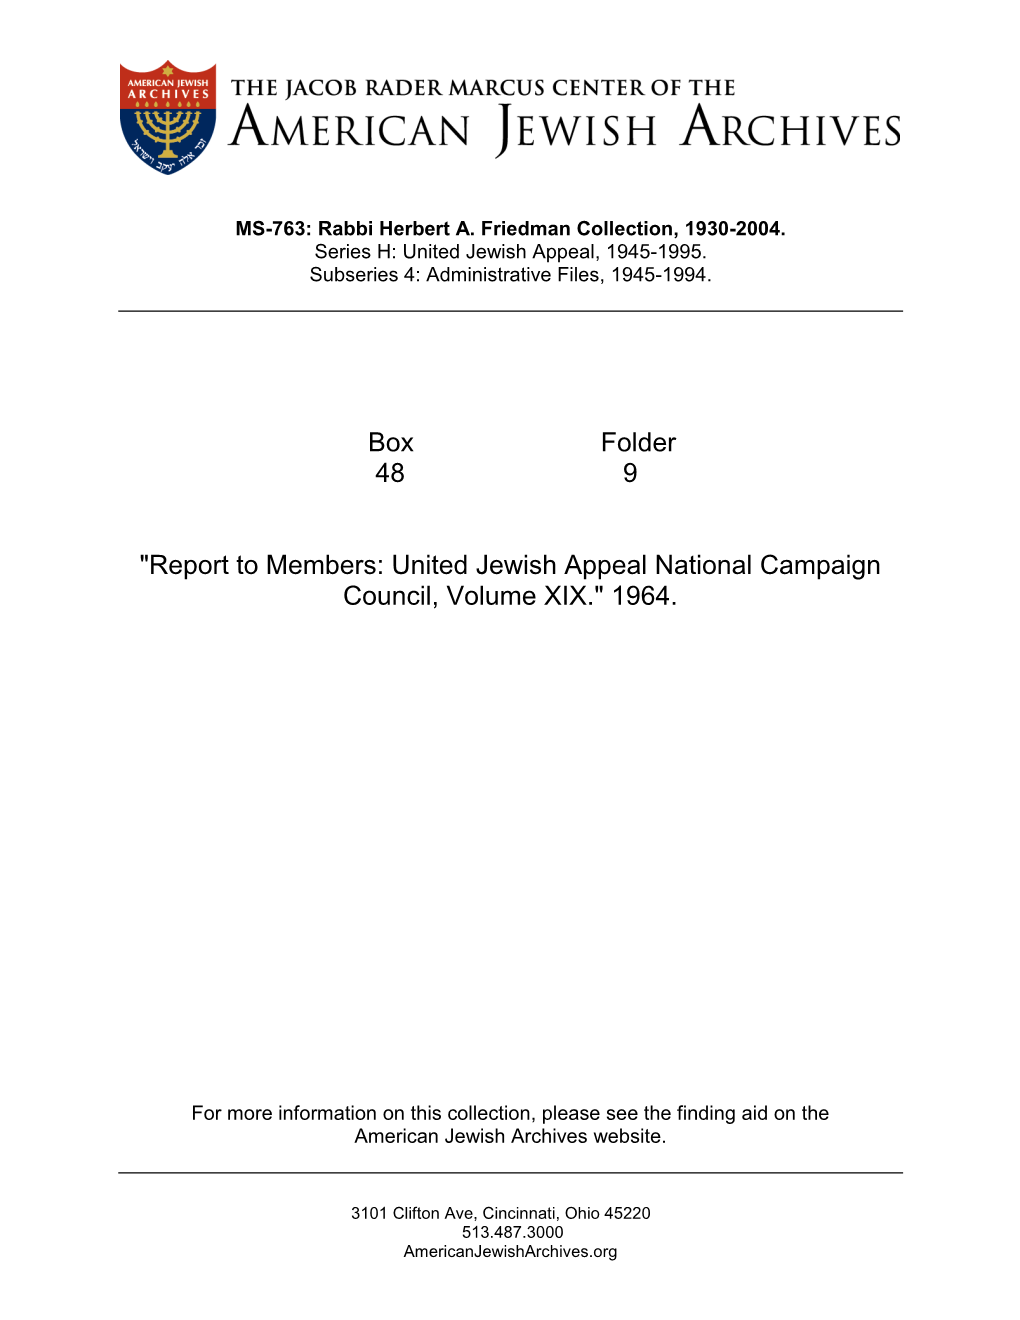 "Report to Members: United Jewish Appeal National Campaign Council, Volume XIX." 1964